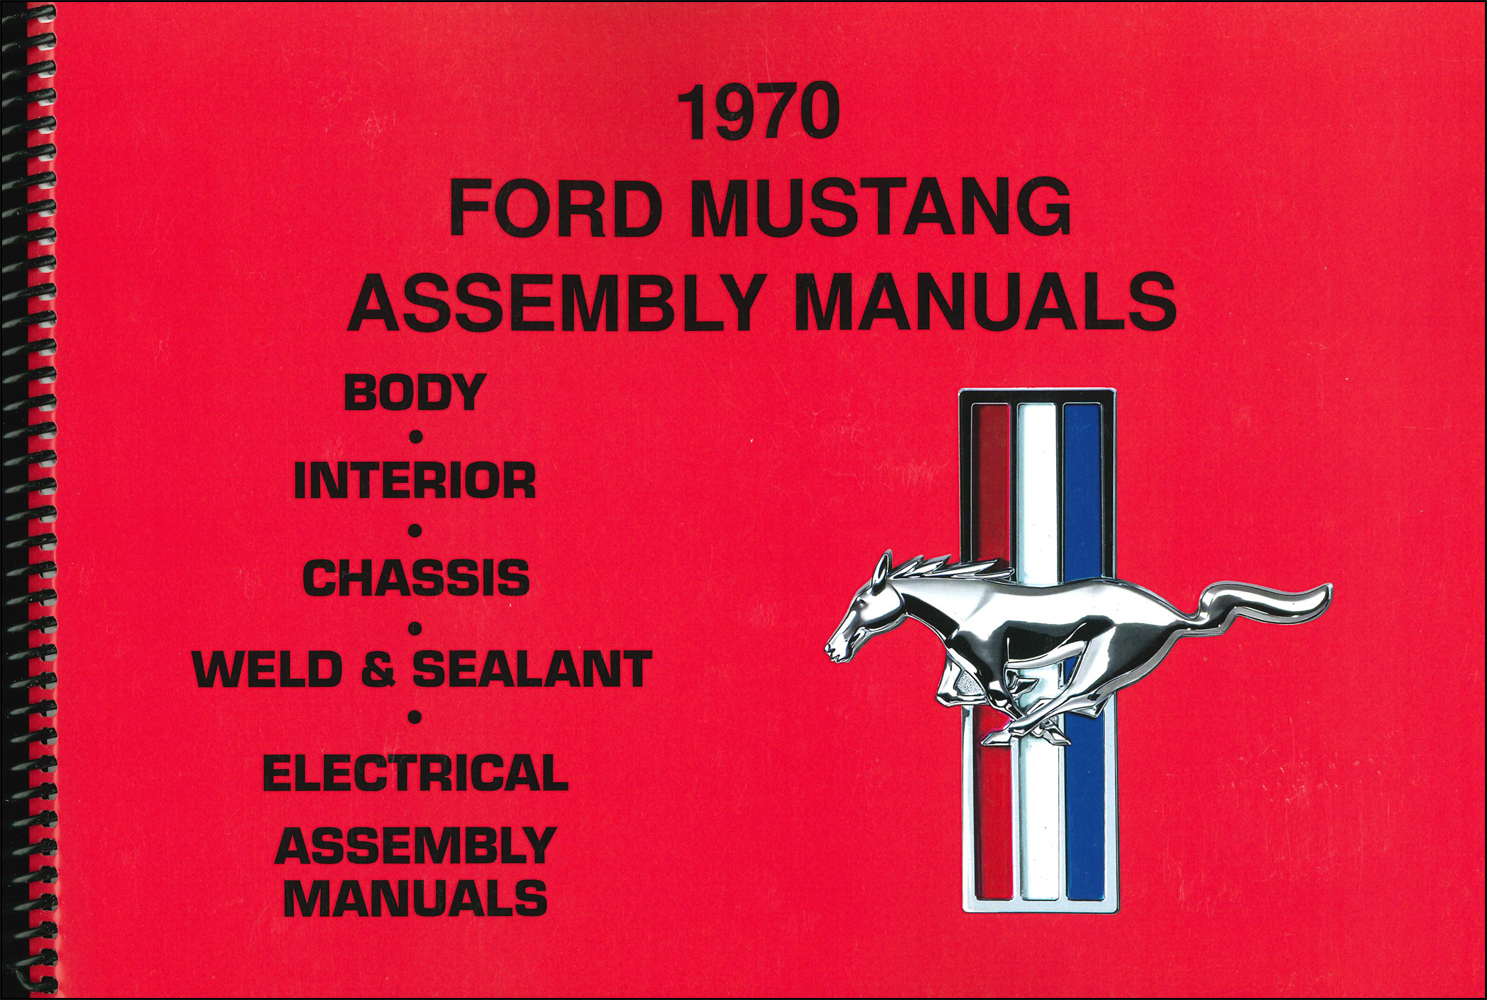 1970 Ford Mustang Assembly Manual Reprint set of 5 Books in 1 Volume